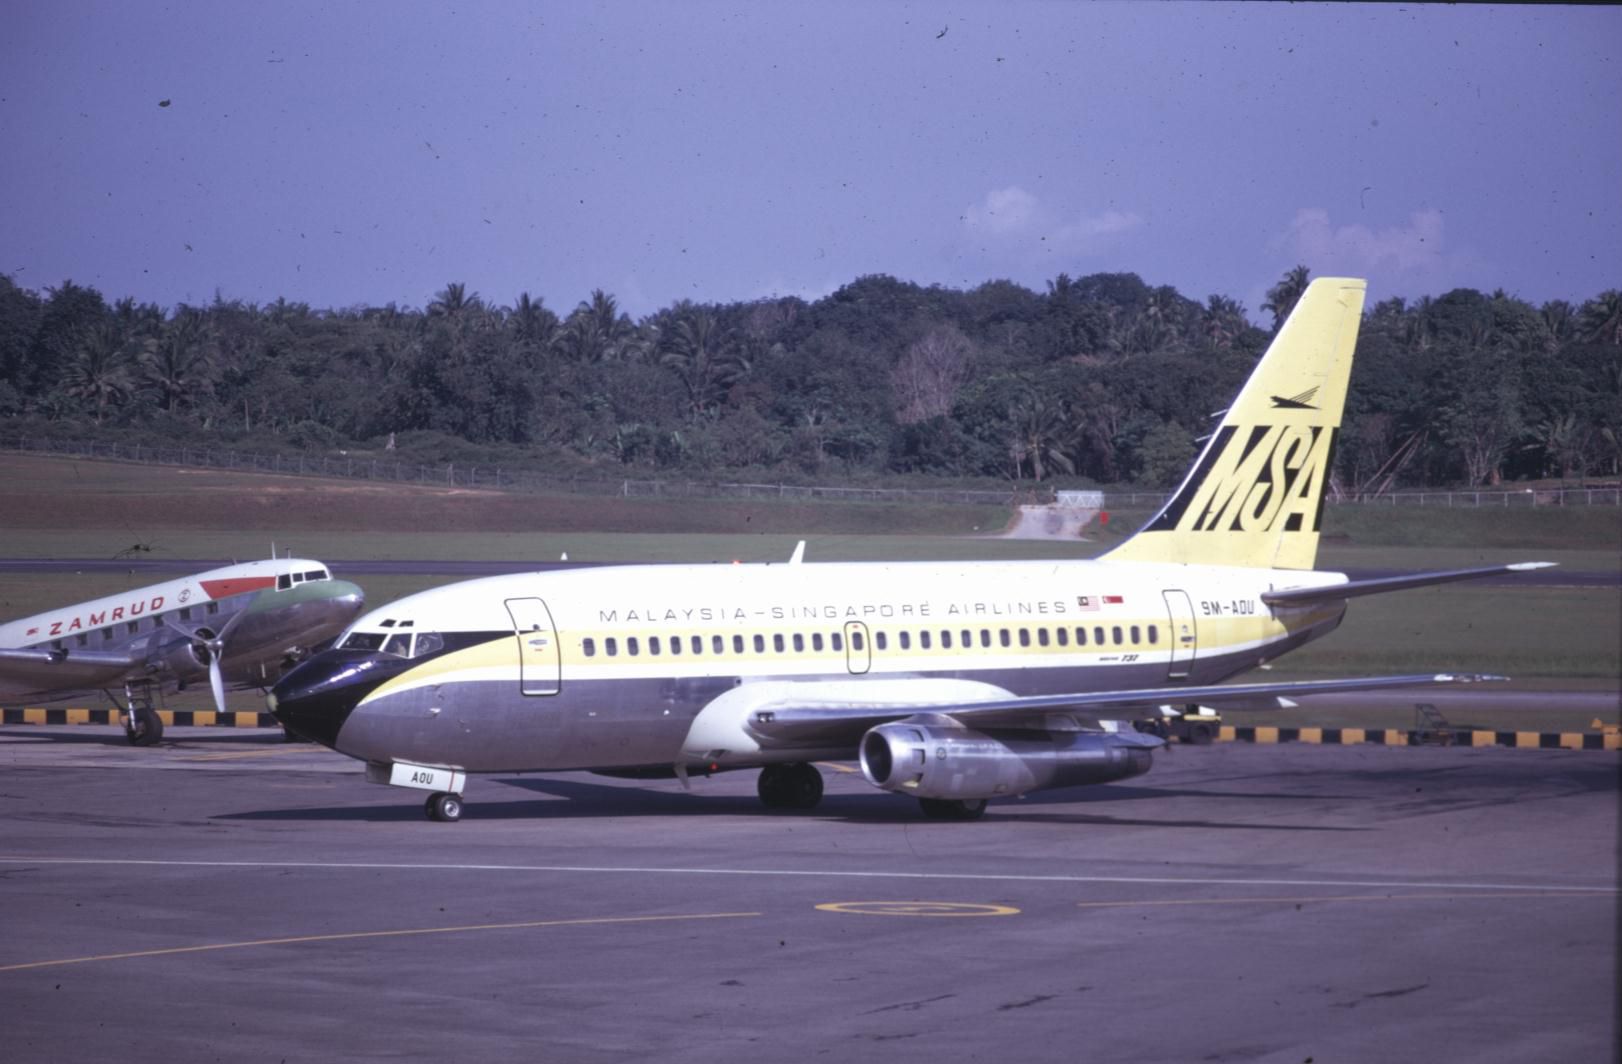 Malaysia-Singapore Airlines Boeing 737-100